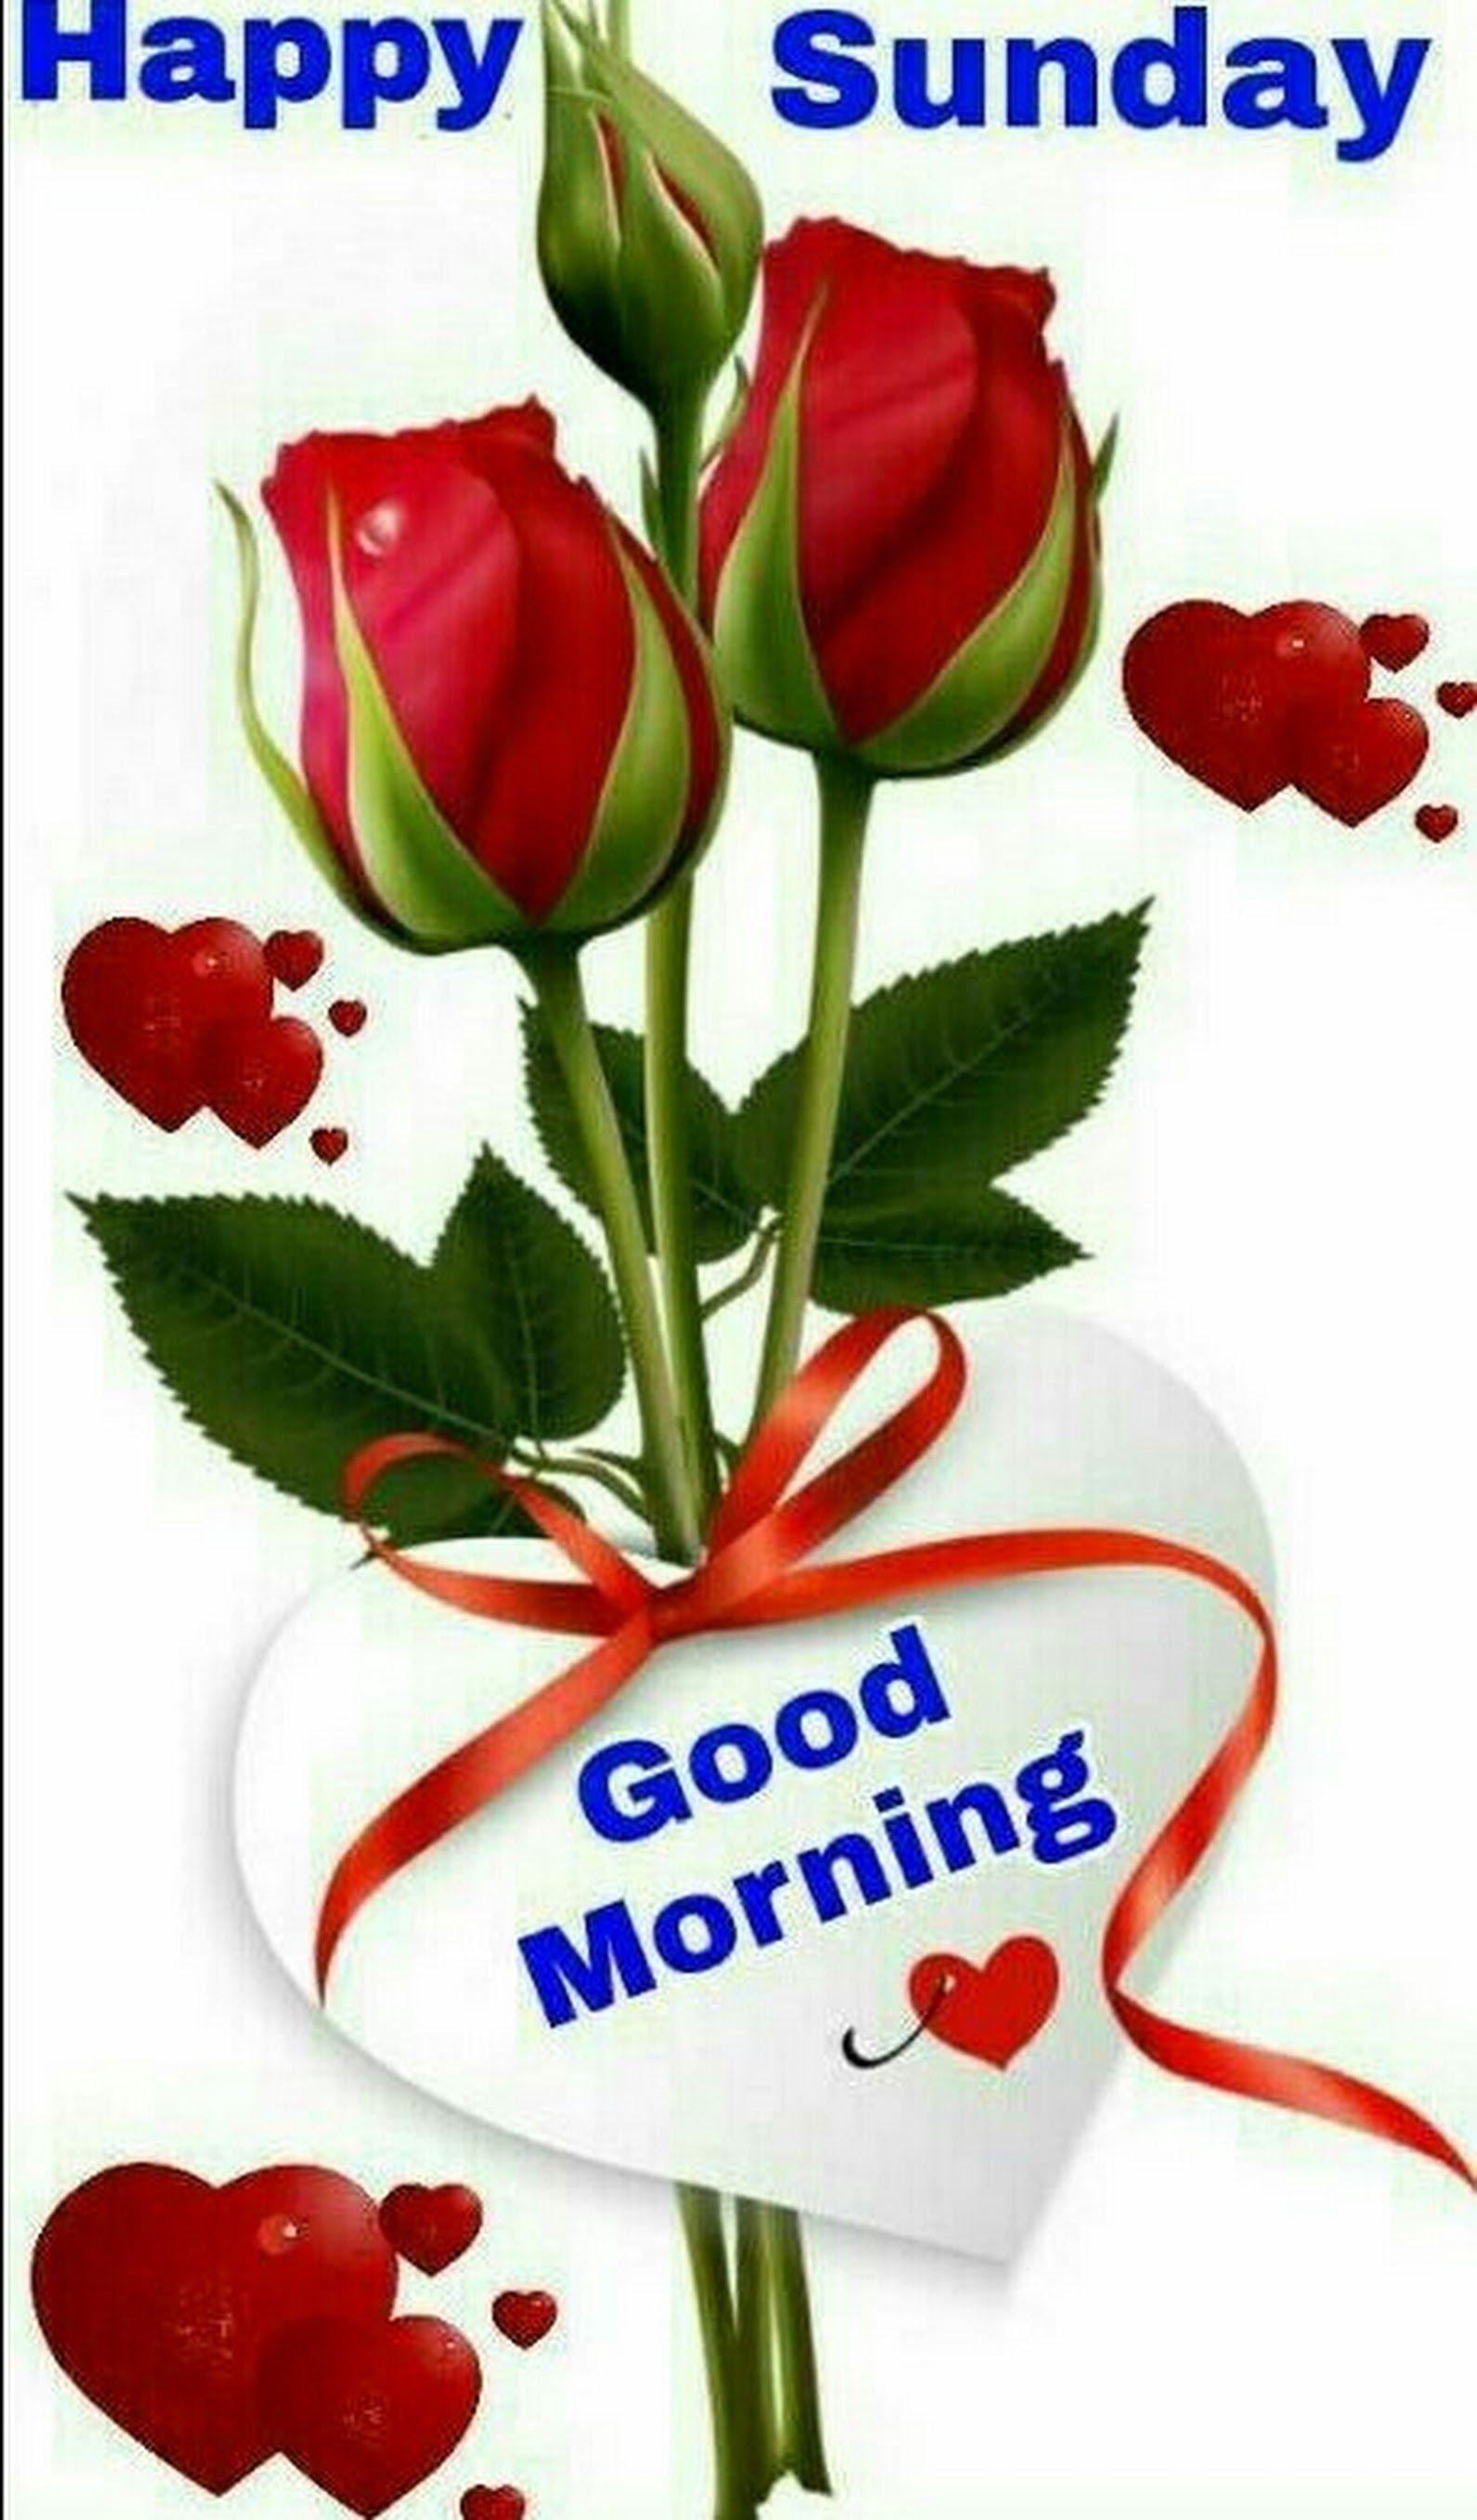 Good morning FRIEND S Have a happy Sunday Roy+